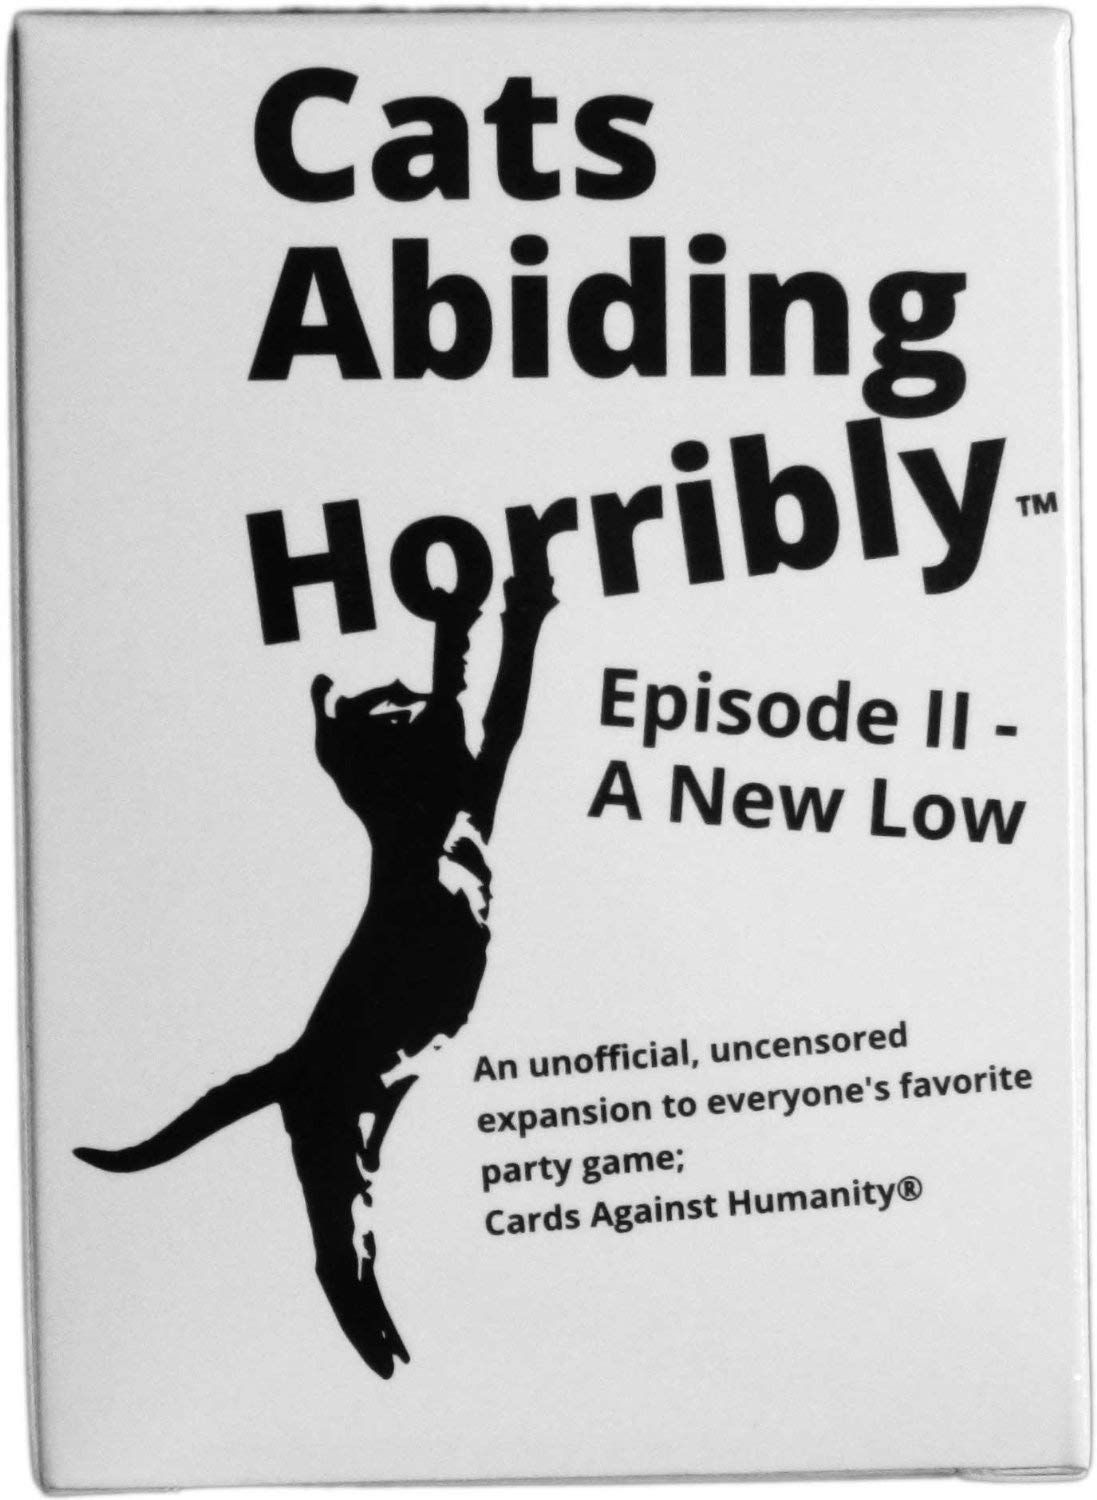 Cats Abiding Horribly: Episode II – A New Low